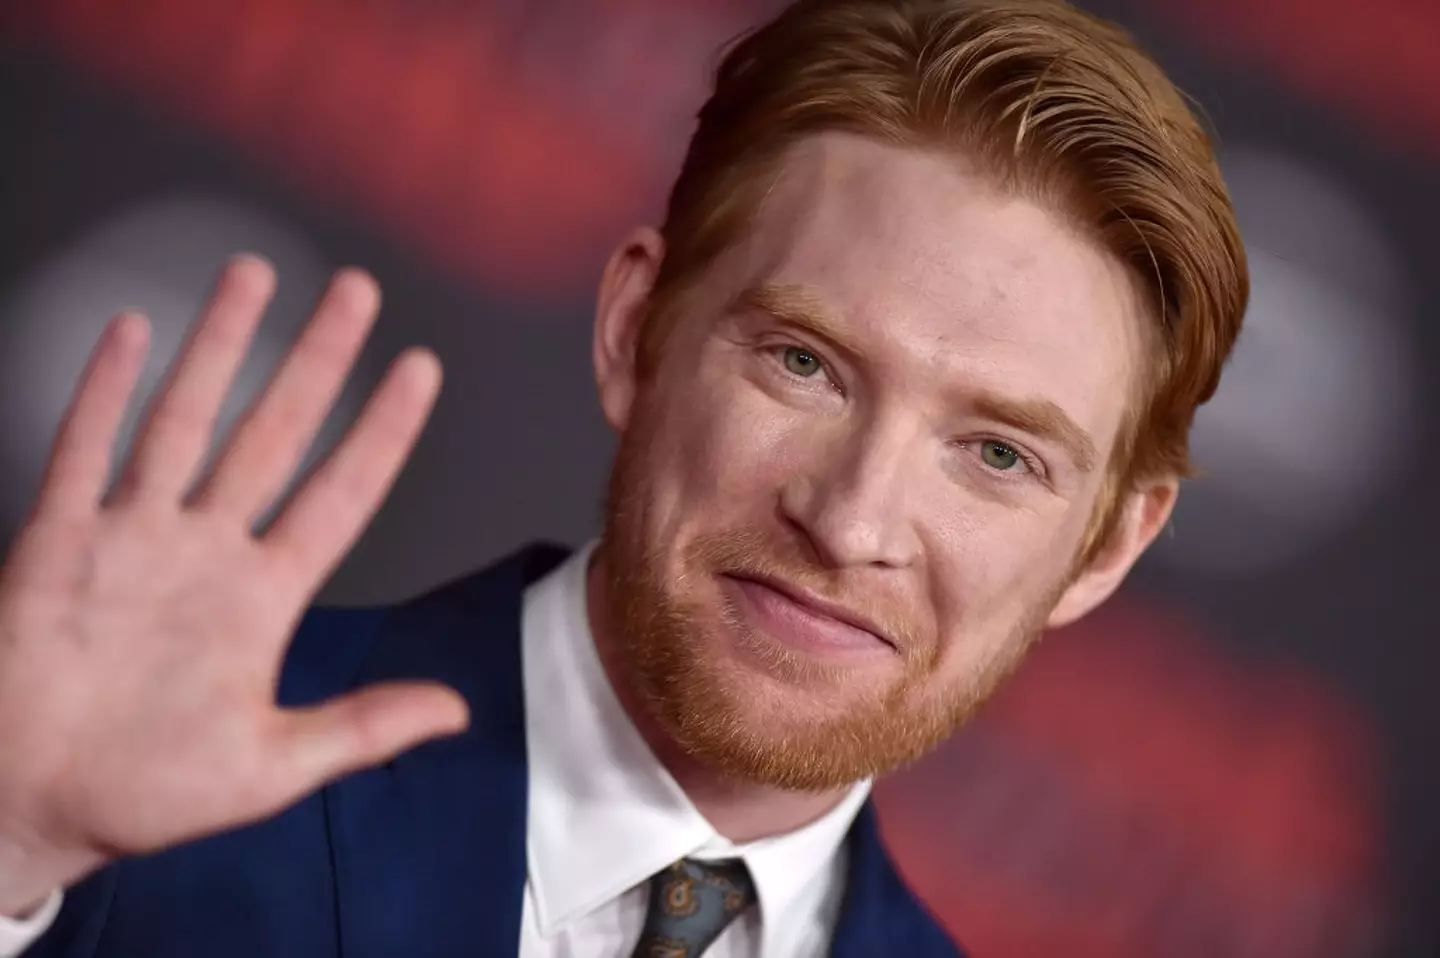 Fans seem impressed over Domhnall Gleeson's casting. (Axelle/Bauer-Griffin/FilmMagic)